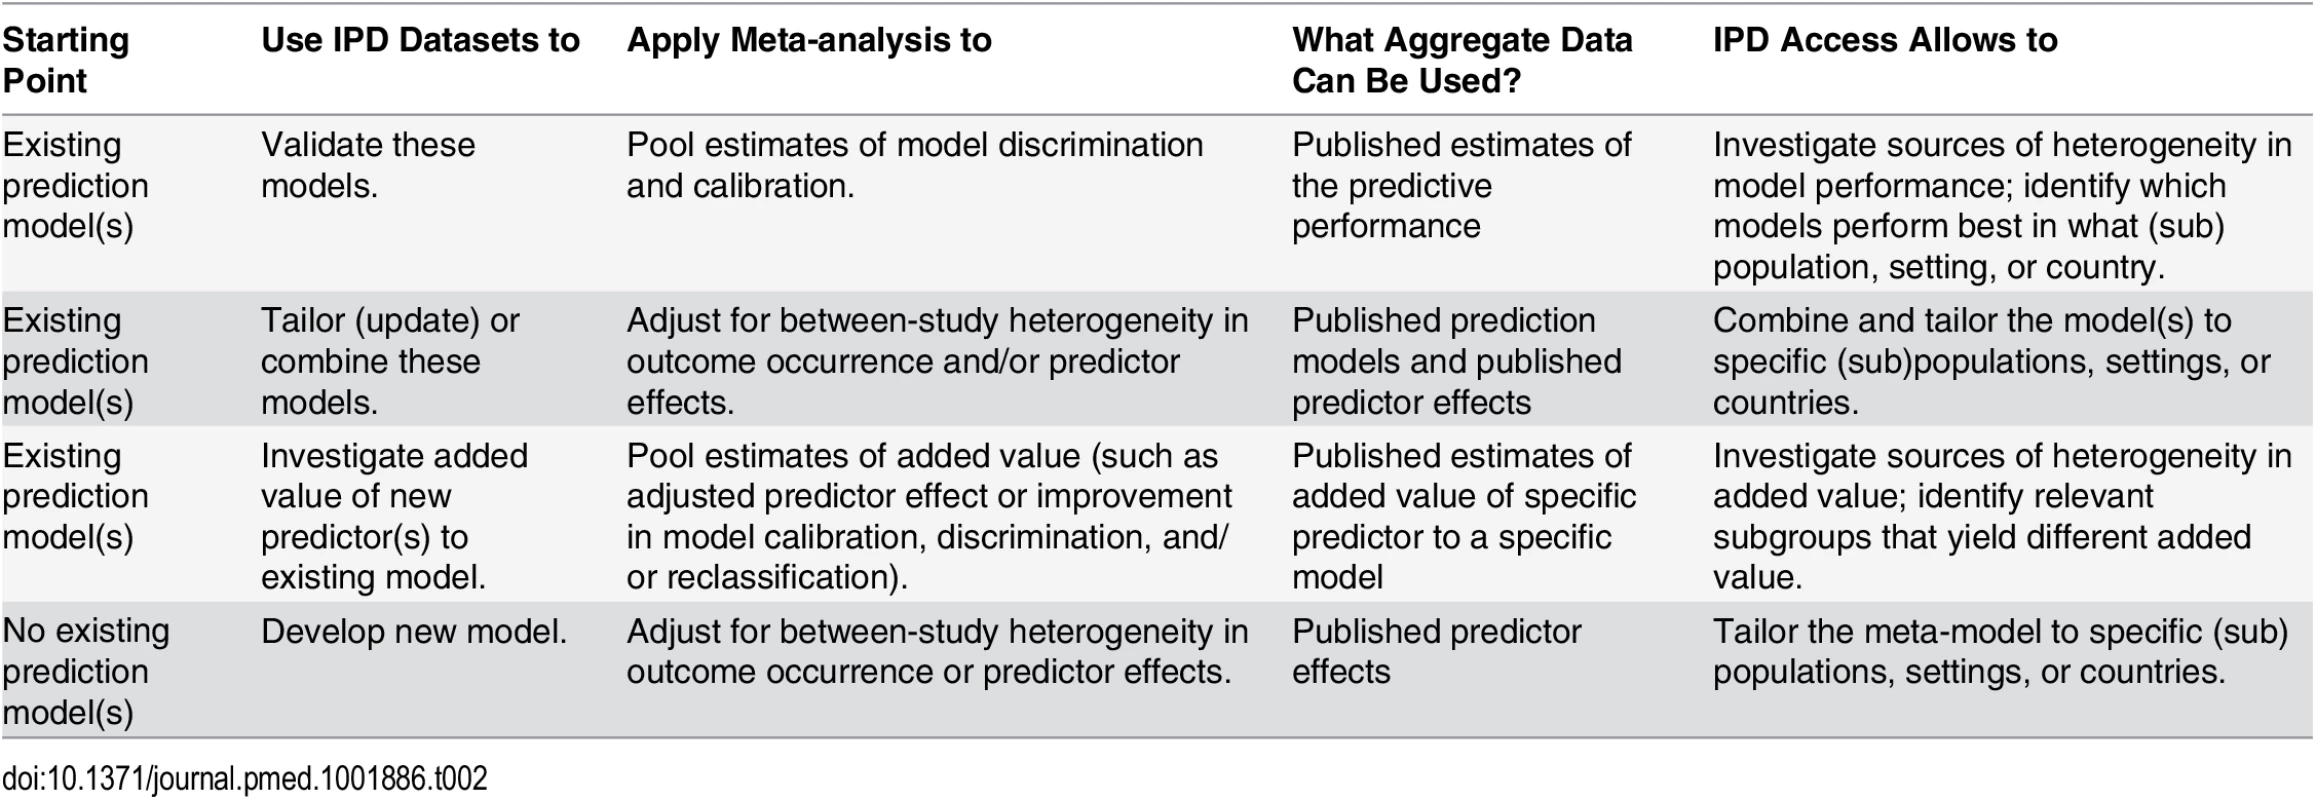 Overview of types (aims) of IPD-MAs of prediction modeling studies.